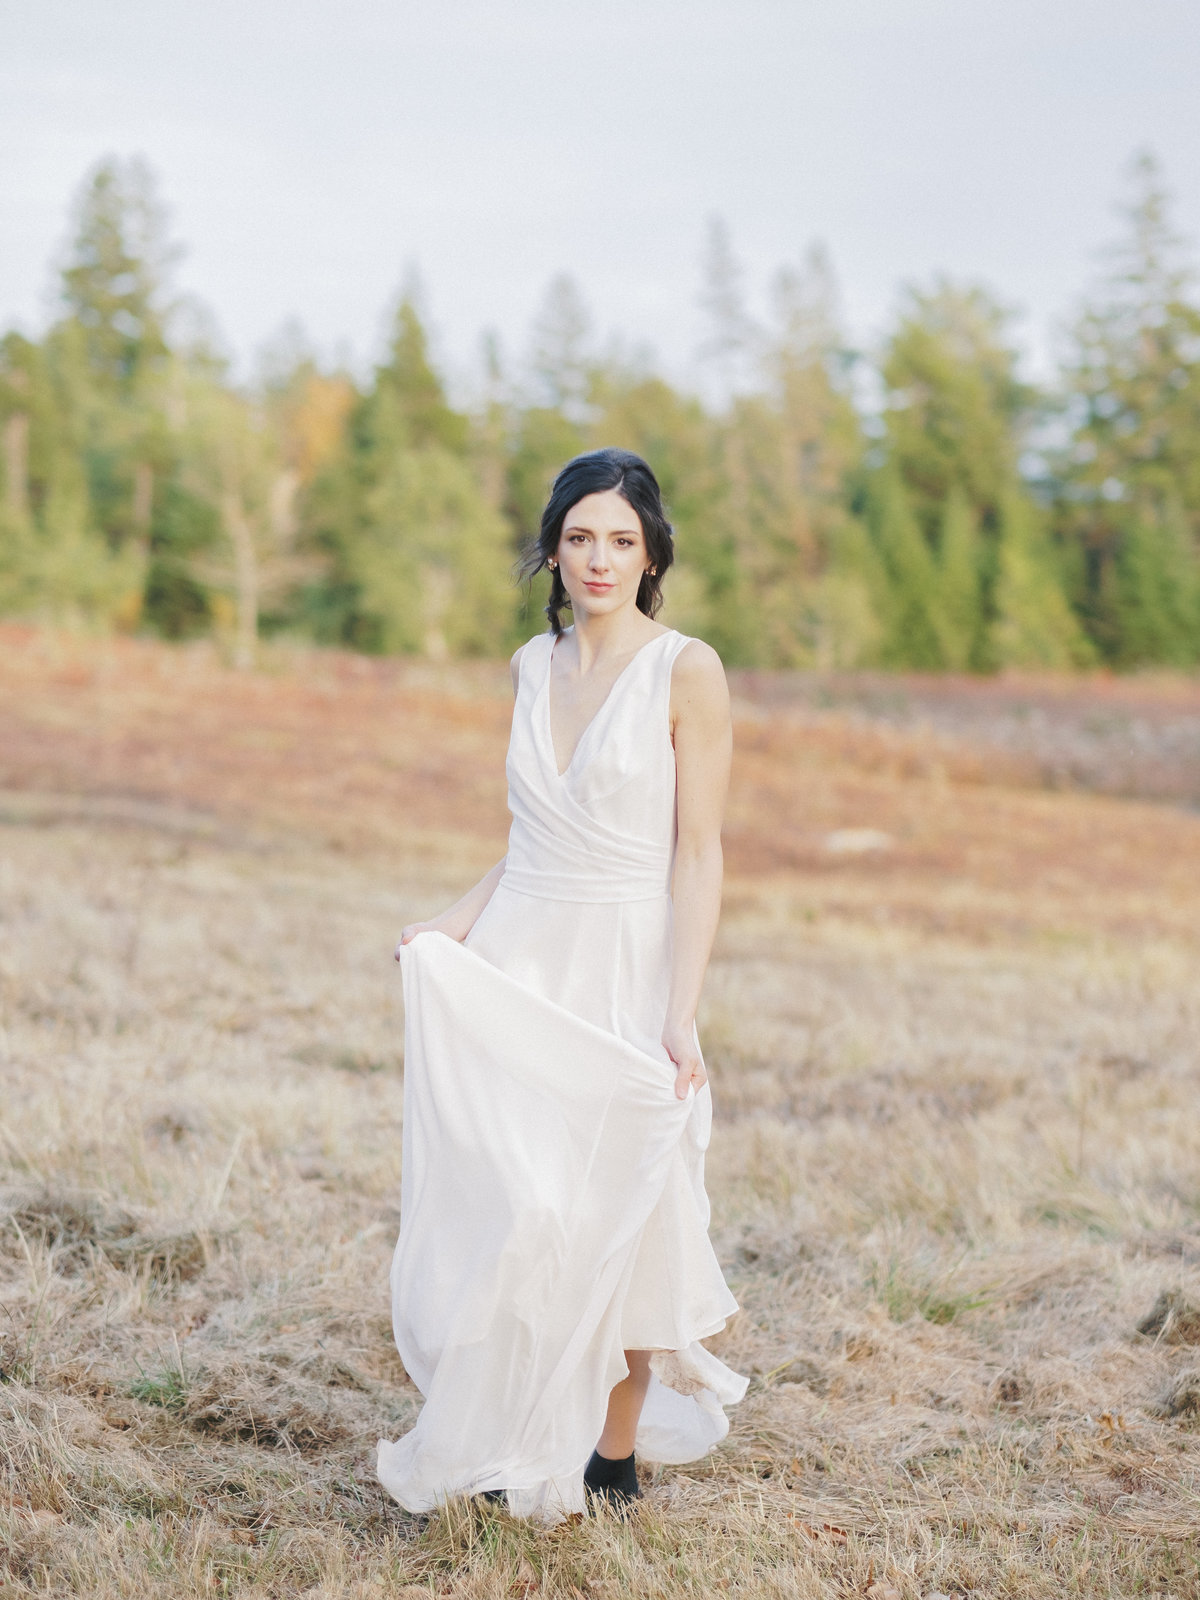 Jacqueline Anne Photography - Mount Uniacke Editorial-27